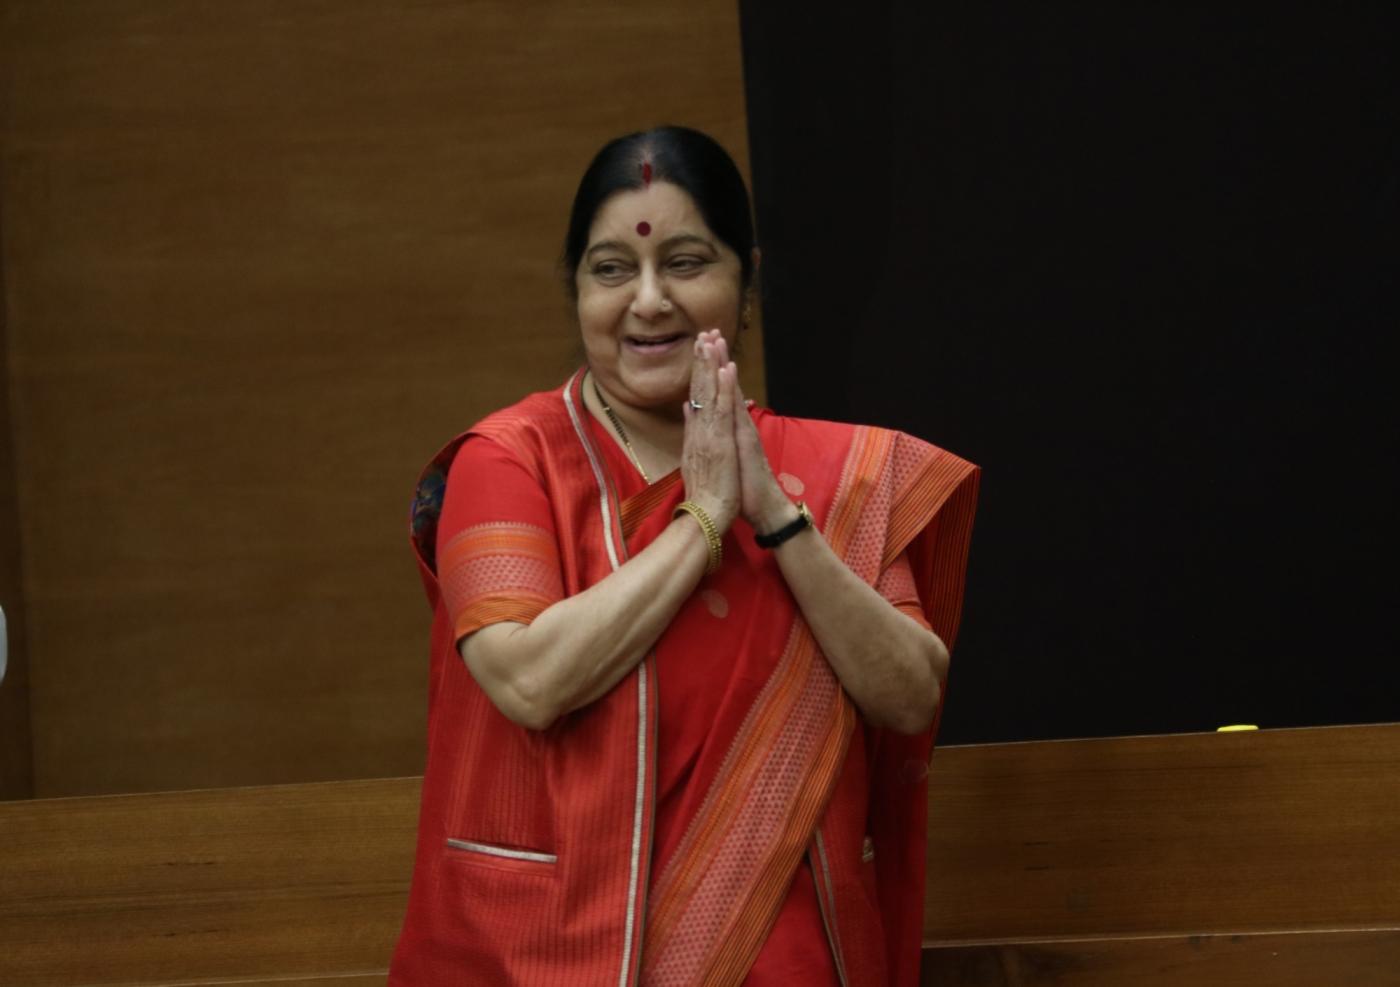 New Delhi: Union Minister and BJP leader Sushma Swaraj during a programme at party's headquarter, in New Delhi, on May 5, 2019. (Photo: IANS) by . 